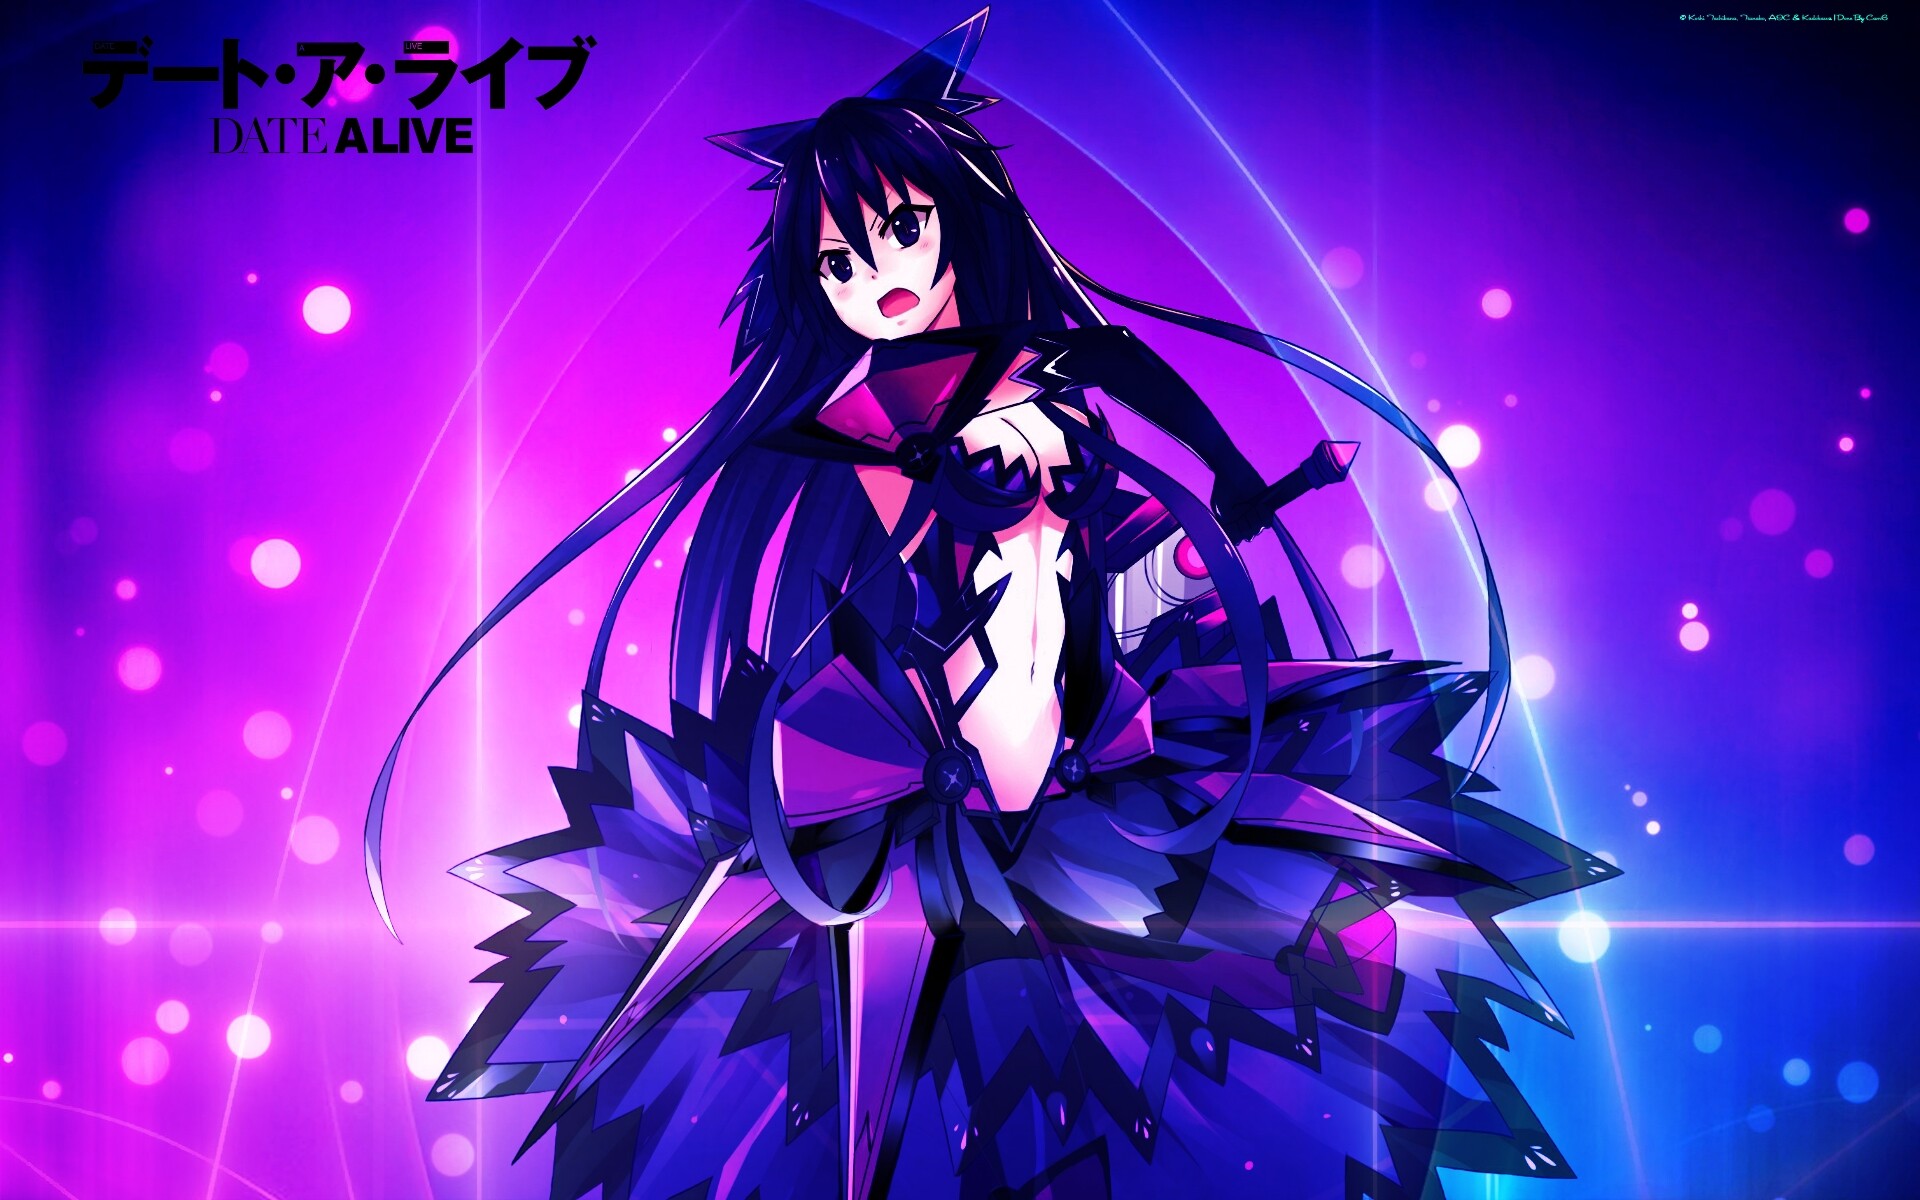 ArtStation - Date A Live Wallpapers